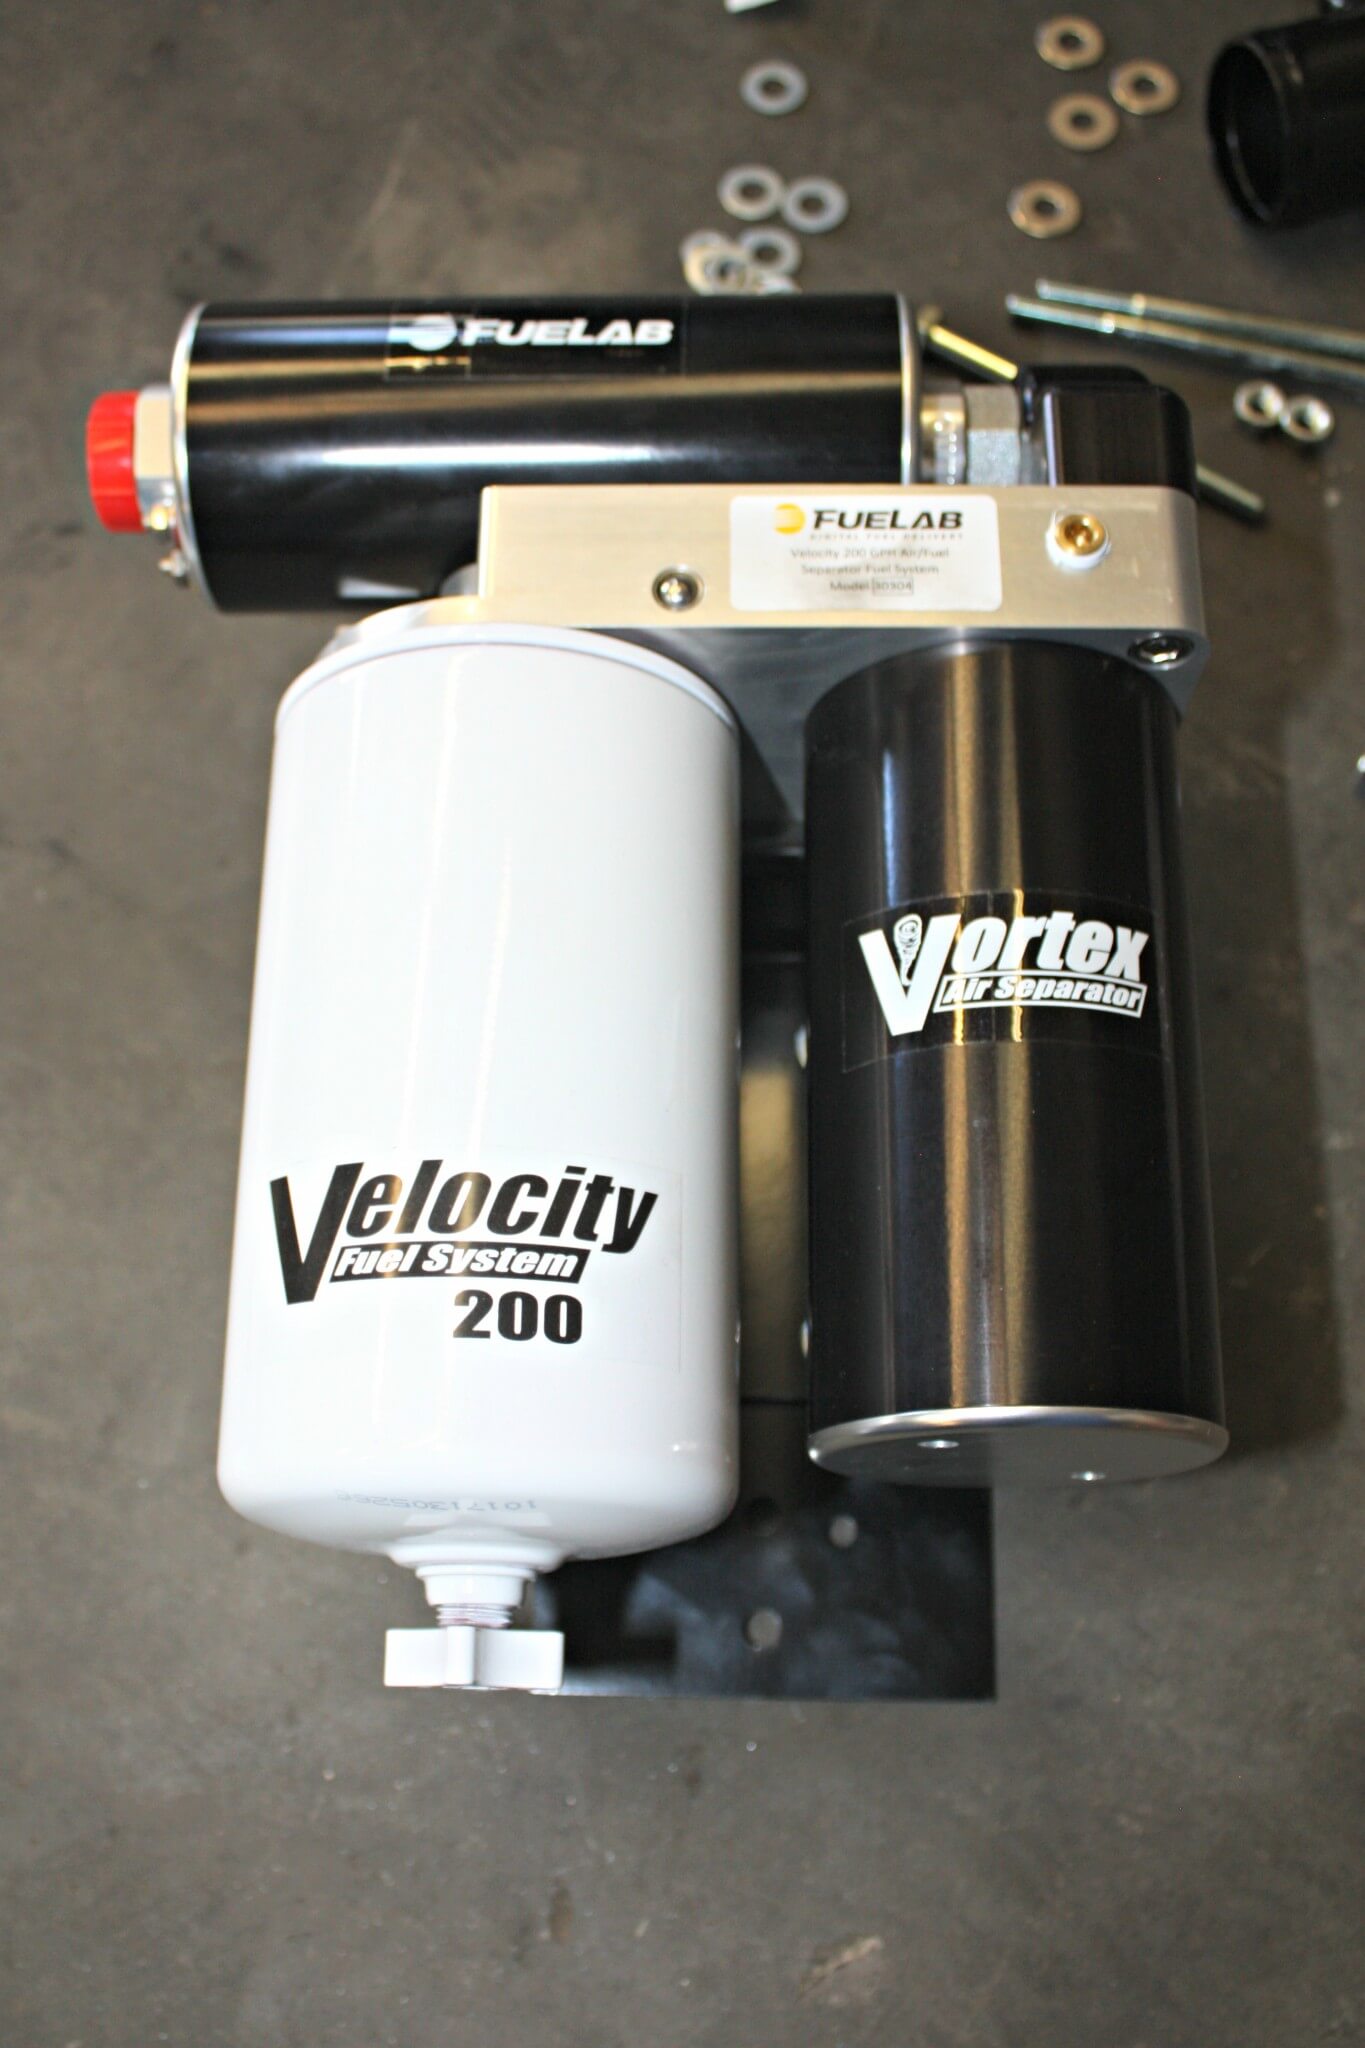 4. Using a rather large fuel filter with a built-in water separation feature, the Velocity system mounts to the supplied bracket. This was mounted inside the driver-side frame rail. The long cylindrical shape to the right of the filter is Fuelab’s unique Vortex air separation chamber that helps to remove any entrapped air from the fuel before it enters the pump that feeds it onto your CP3 and high-pressure injection system. By removing air from the system and better filtering the fuel, you can expect longer life from your injection pump and injectors, as well as reduced engine noise.